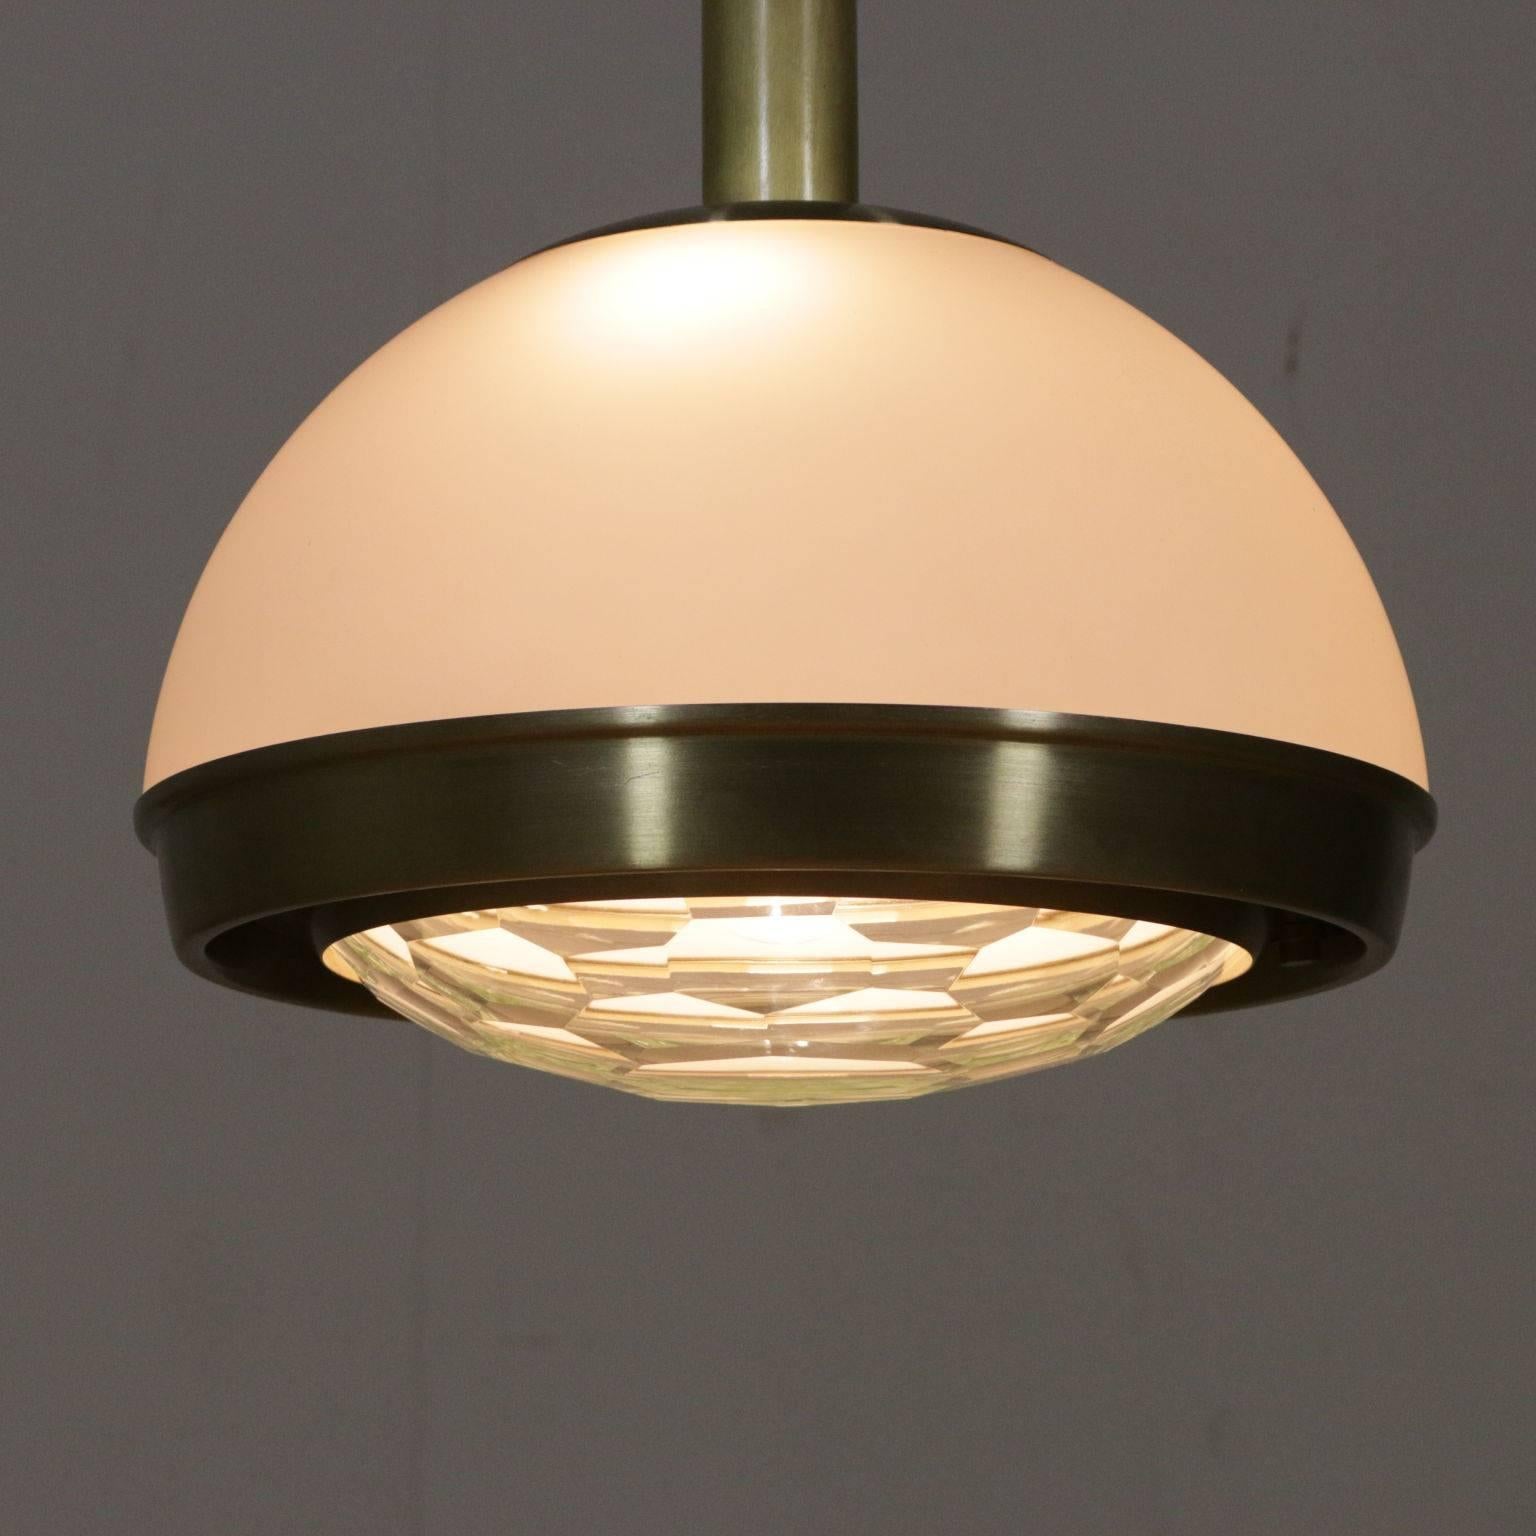 A ceiling lamp designed by Pia Guidetti Crippa for Lumi. Glass and brass. Manufactured in Italy, 1960s.